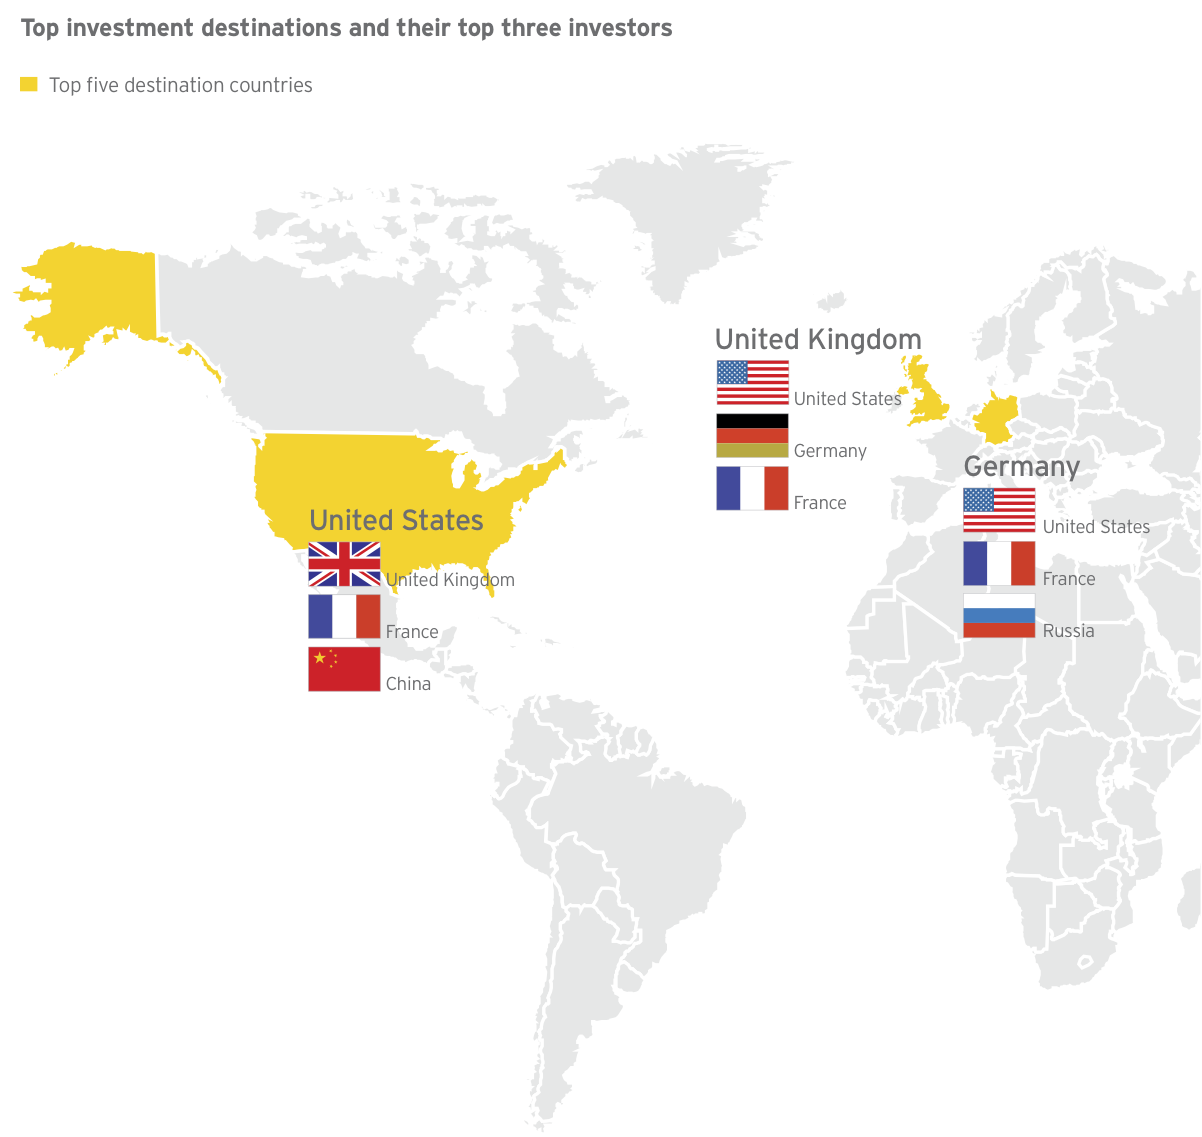 Figure 7: Top investment destinations and their top three investors